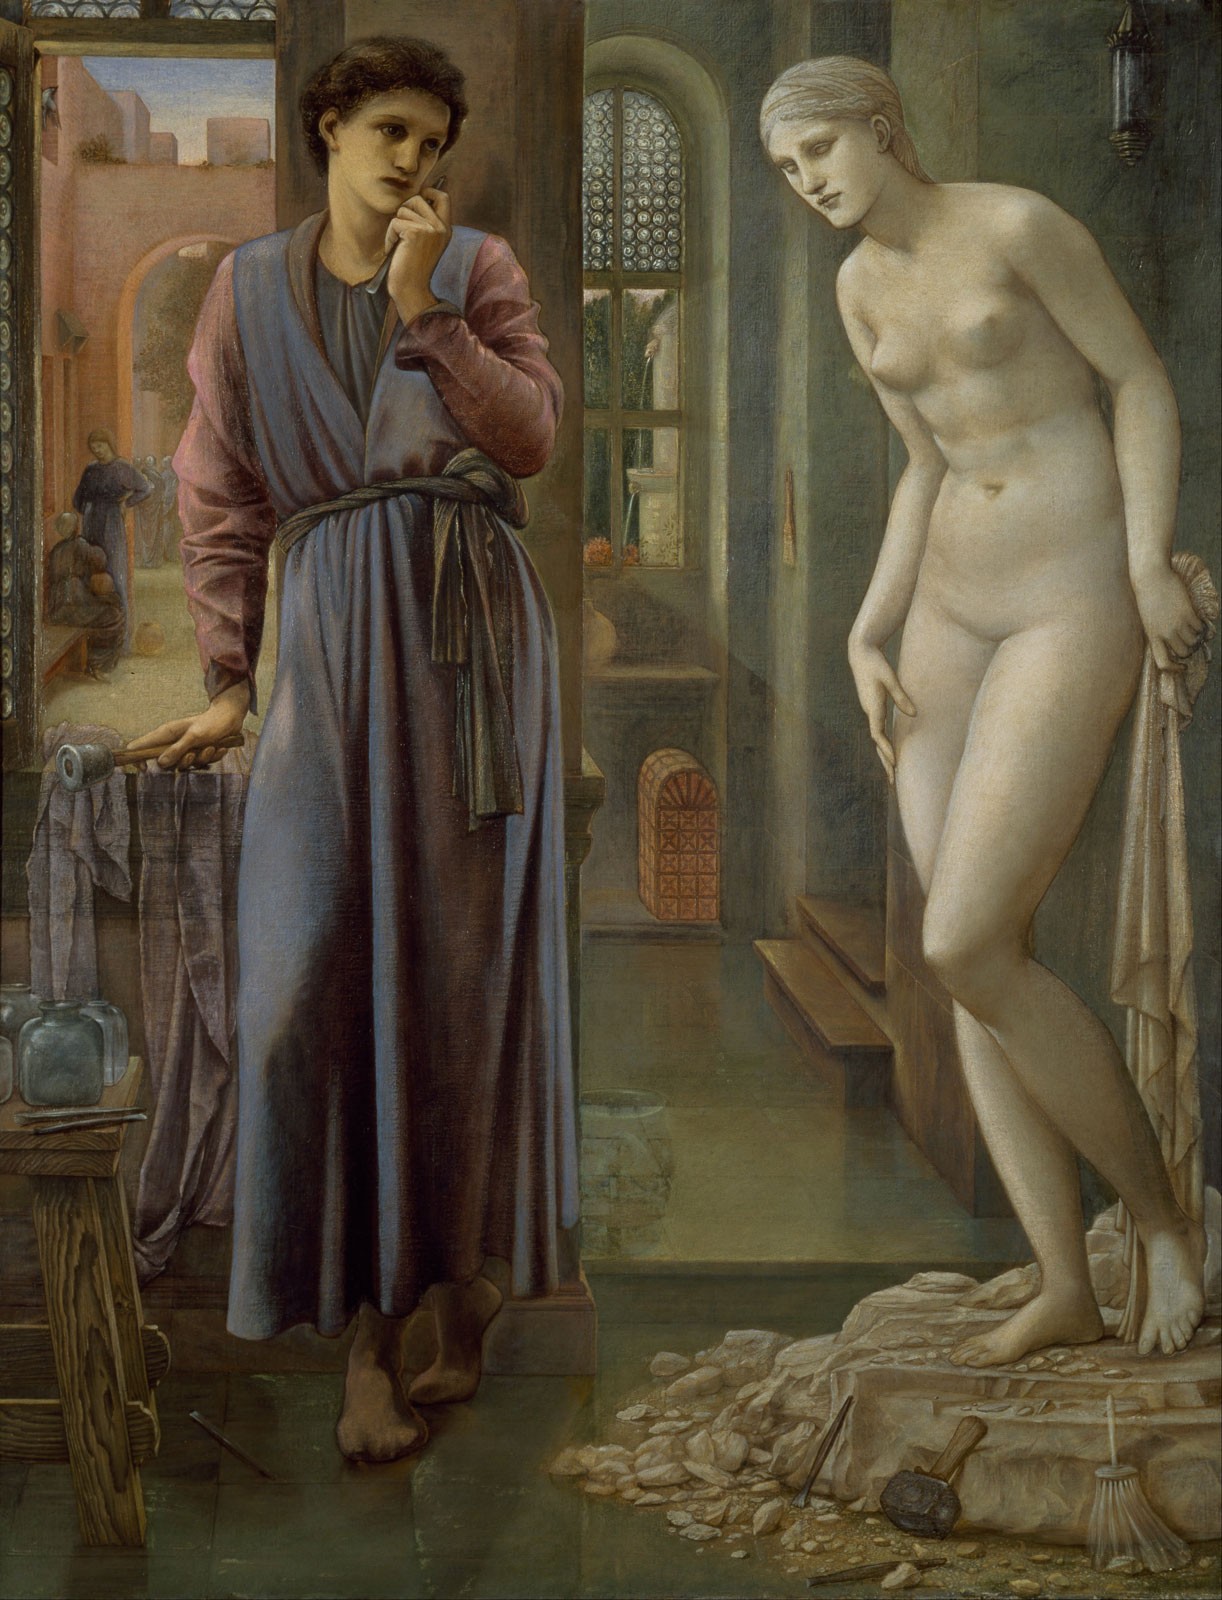 Pygmalion and the Image, c.1878, Oil on Canvas